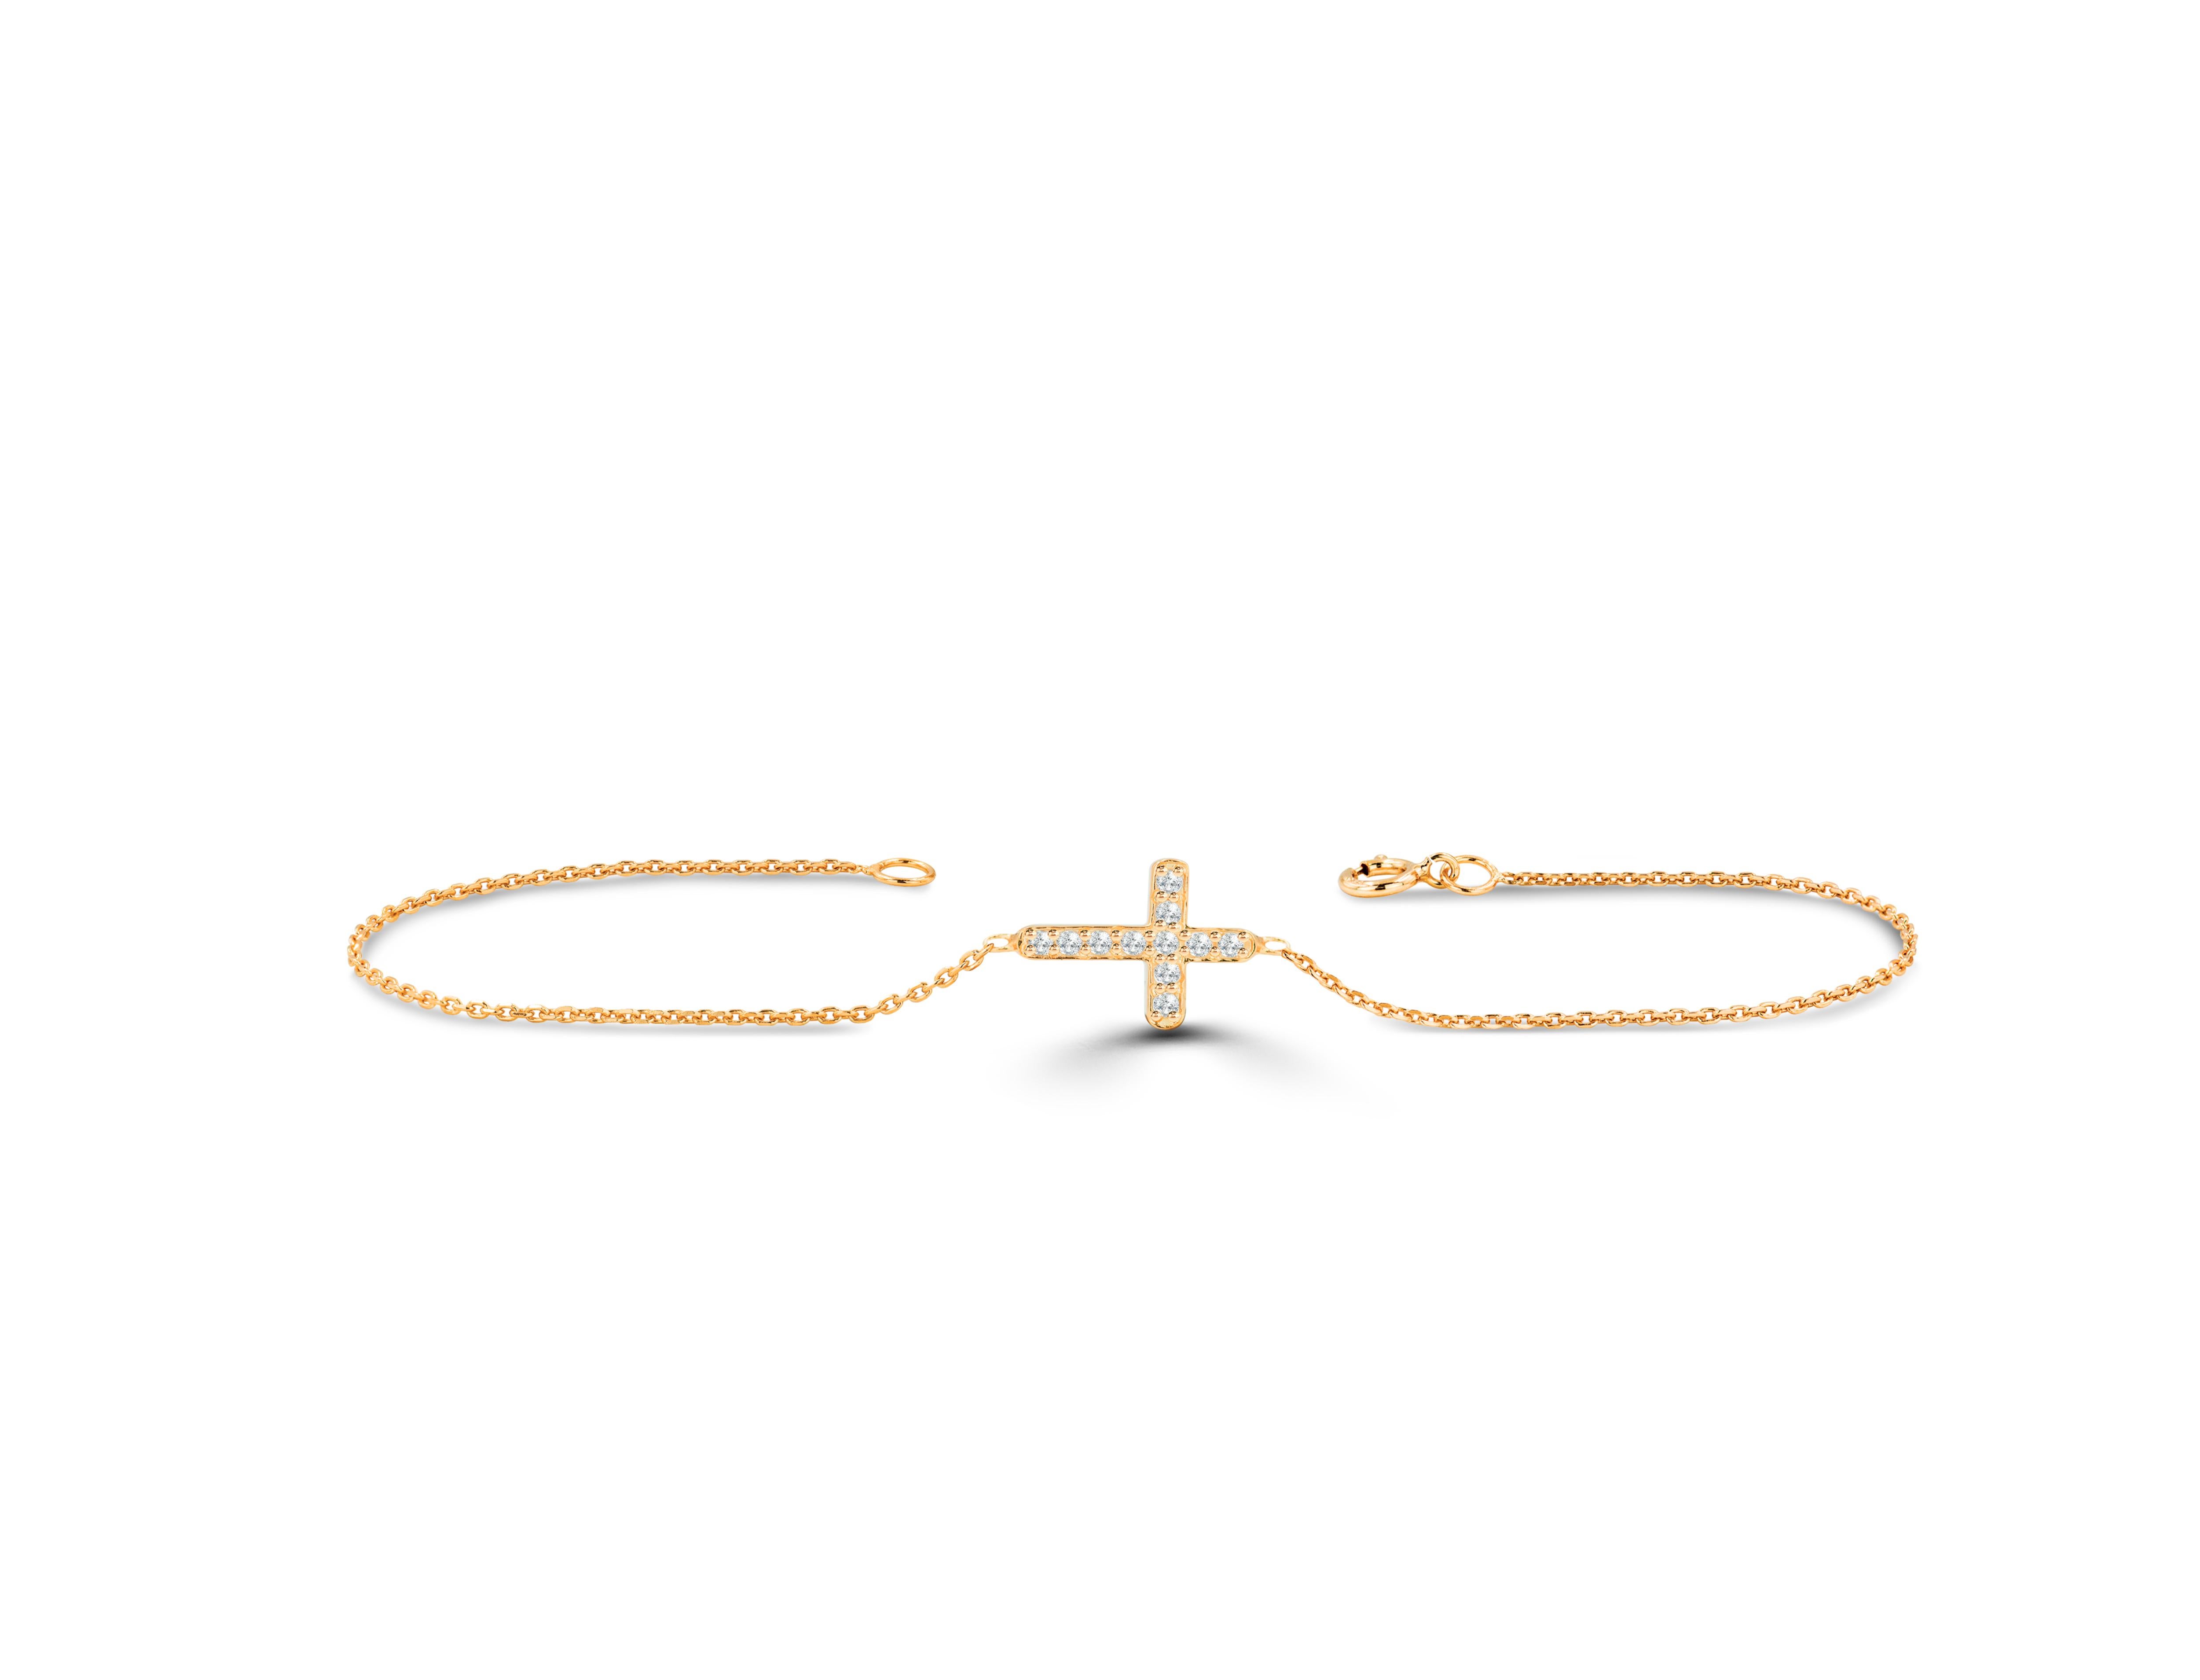 0.08 Carat diamond sideway Cross bracelet is a perfect religious bracelet and is meant for you to feel good and protected whenever worn. This bracelet can be customized in the gold color and gold karat of your choice. Wear this bracelet with love.